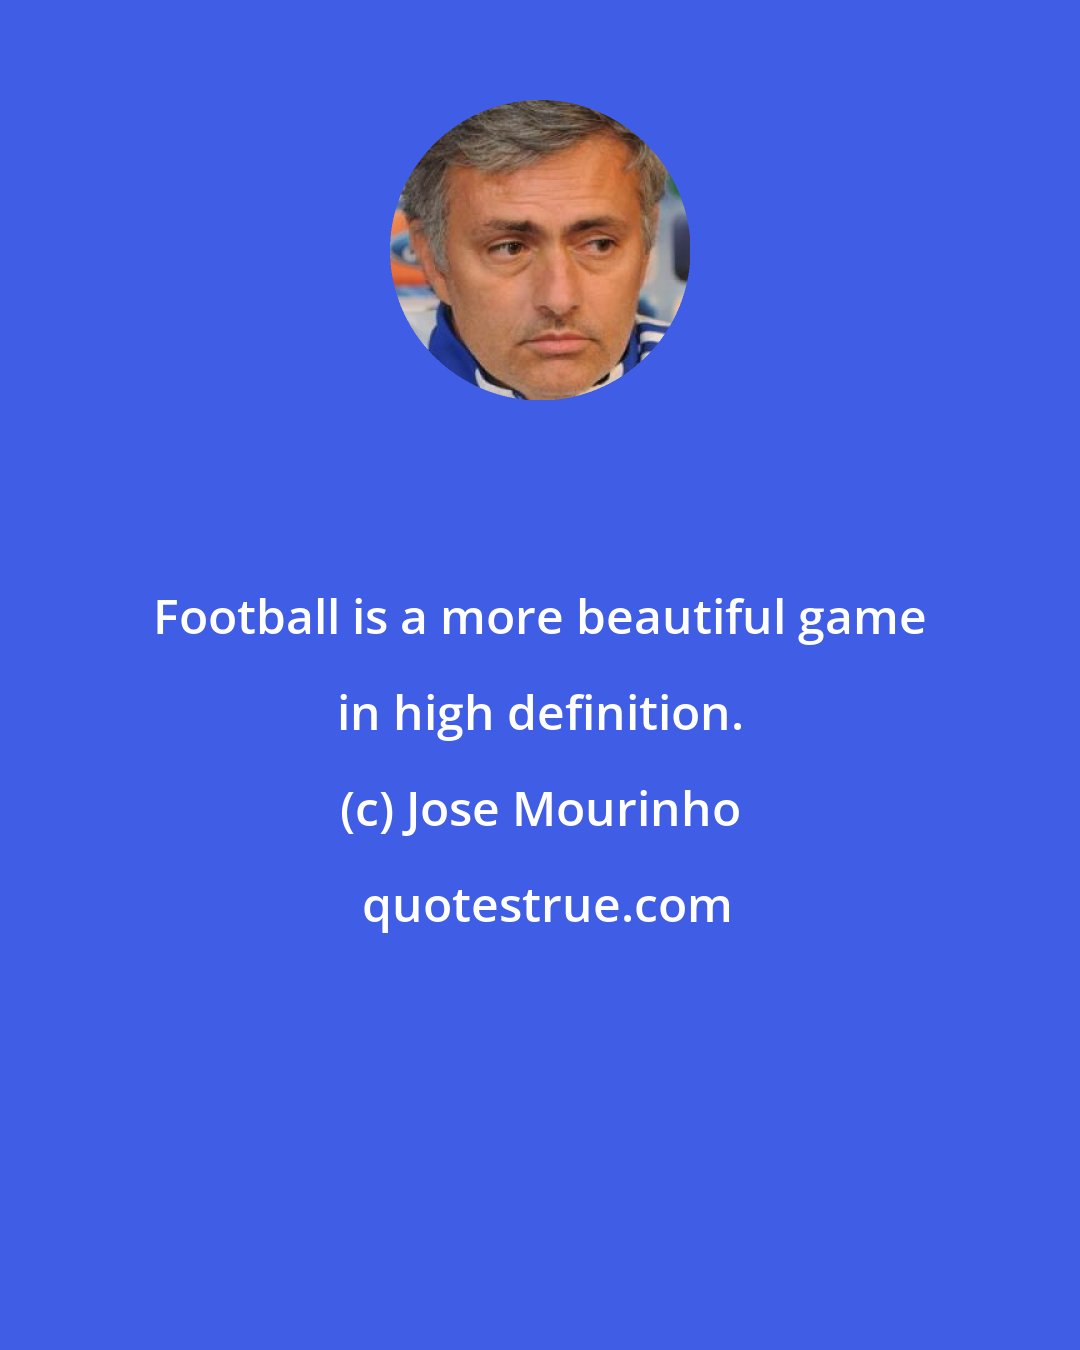 Jose Mourinho: Football is a more beautiful game in high definition.